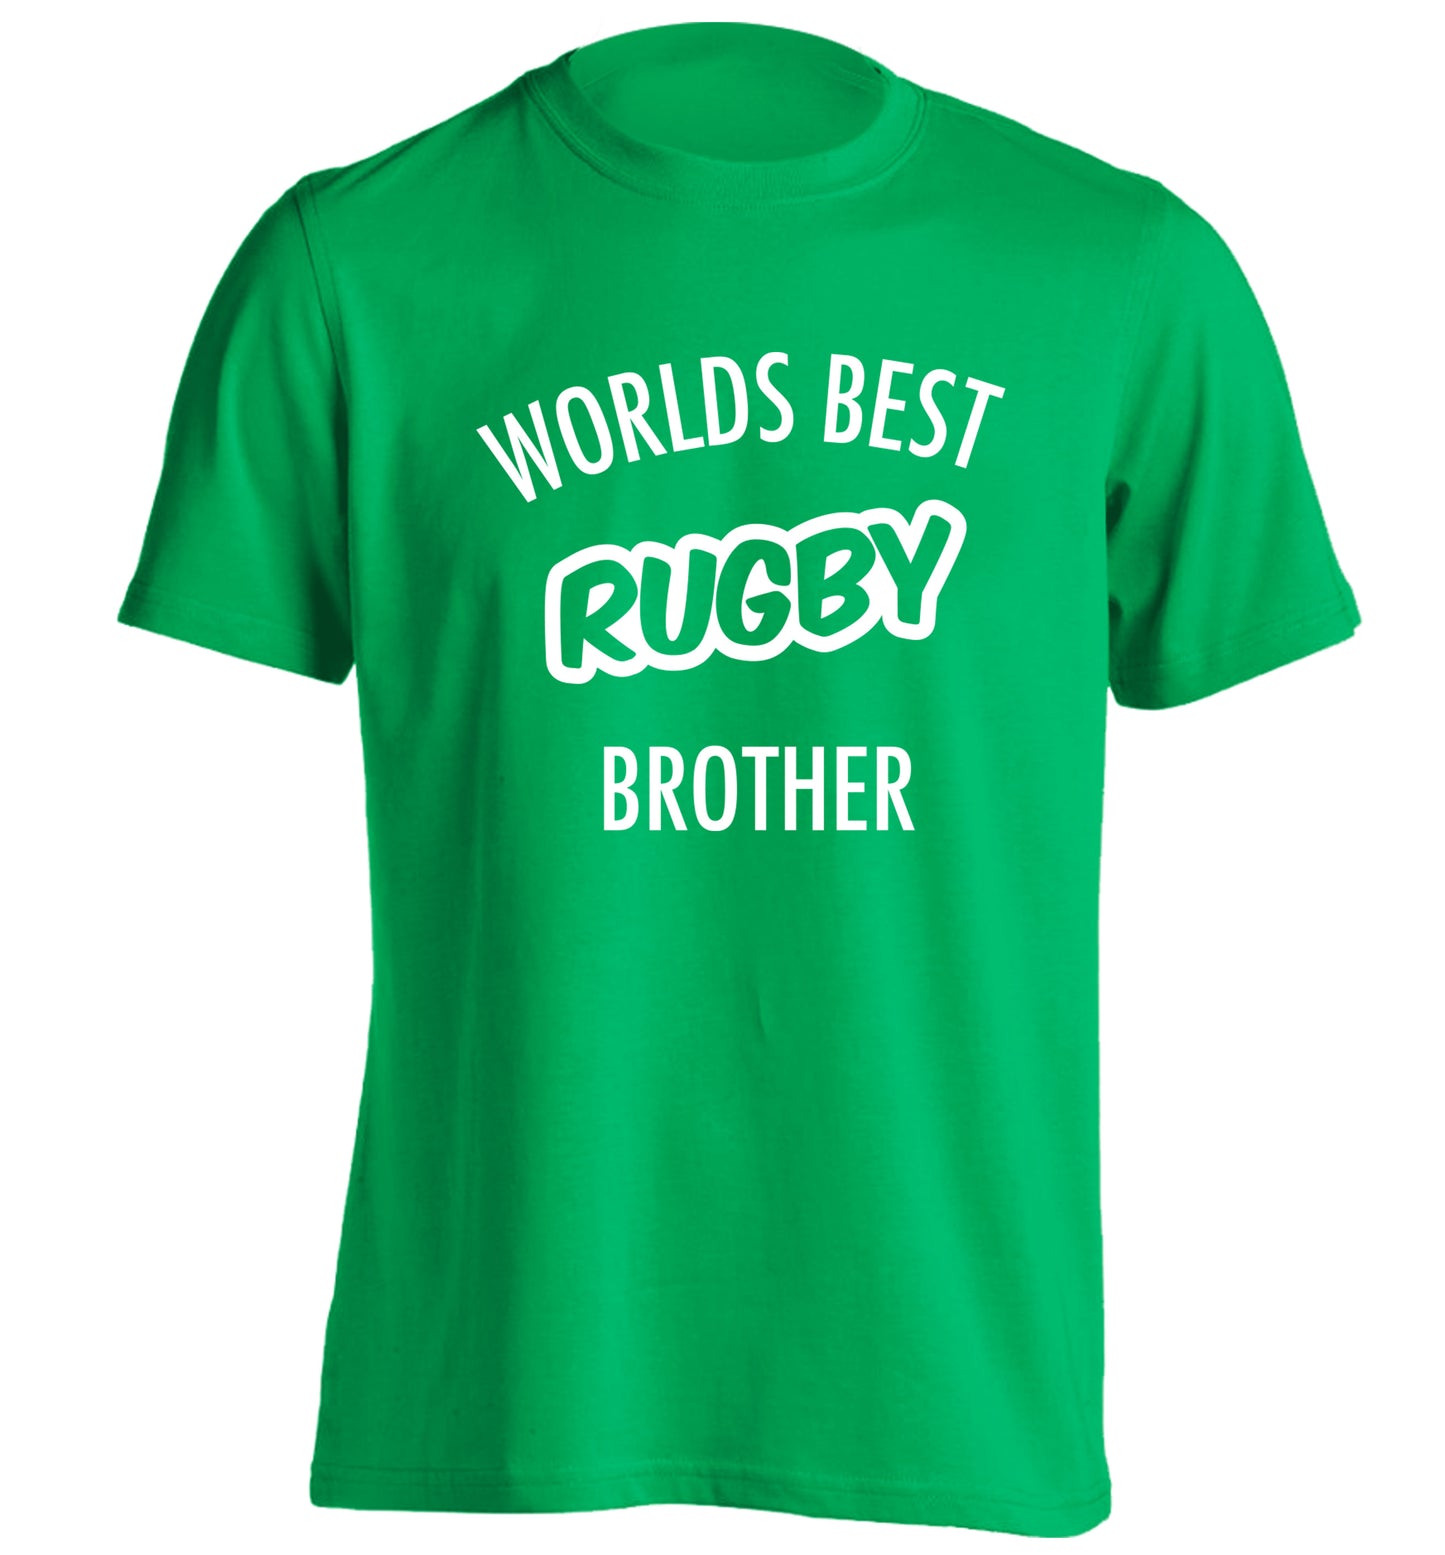 Worlds best rugby brother adults unisex green Tshirt 2XL